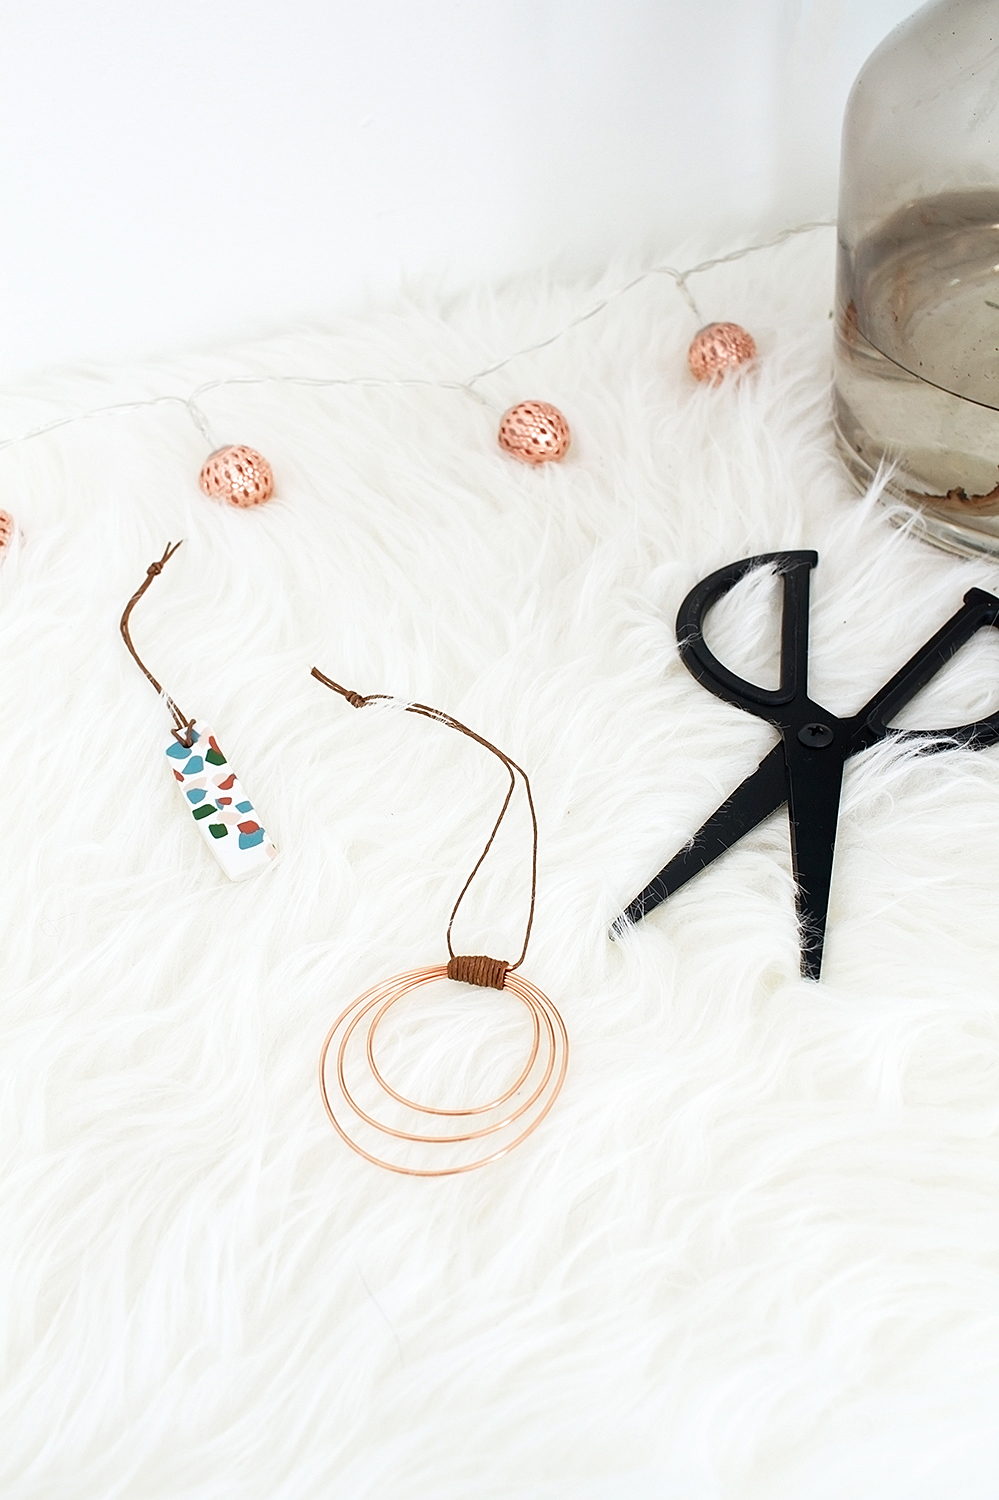 Whip up these DIY Copper Wire Hoop Ornaments in just ten minutes for a little boho bling on your tree.